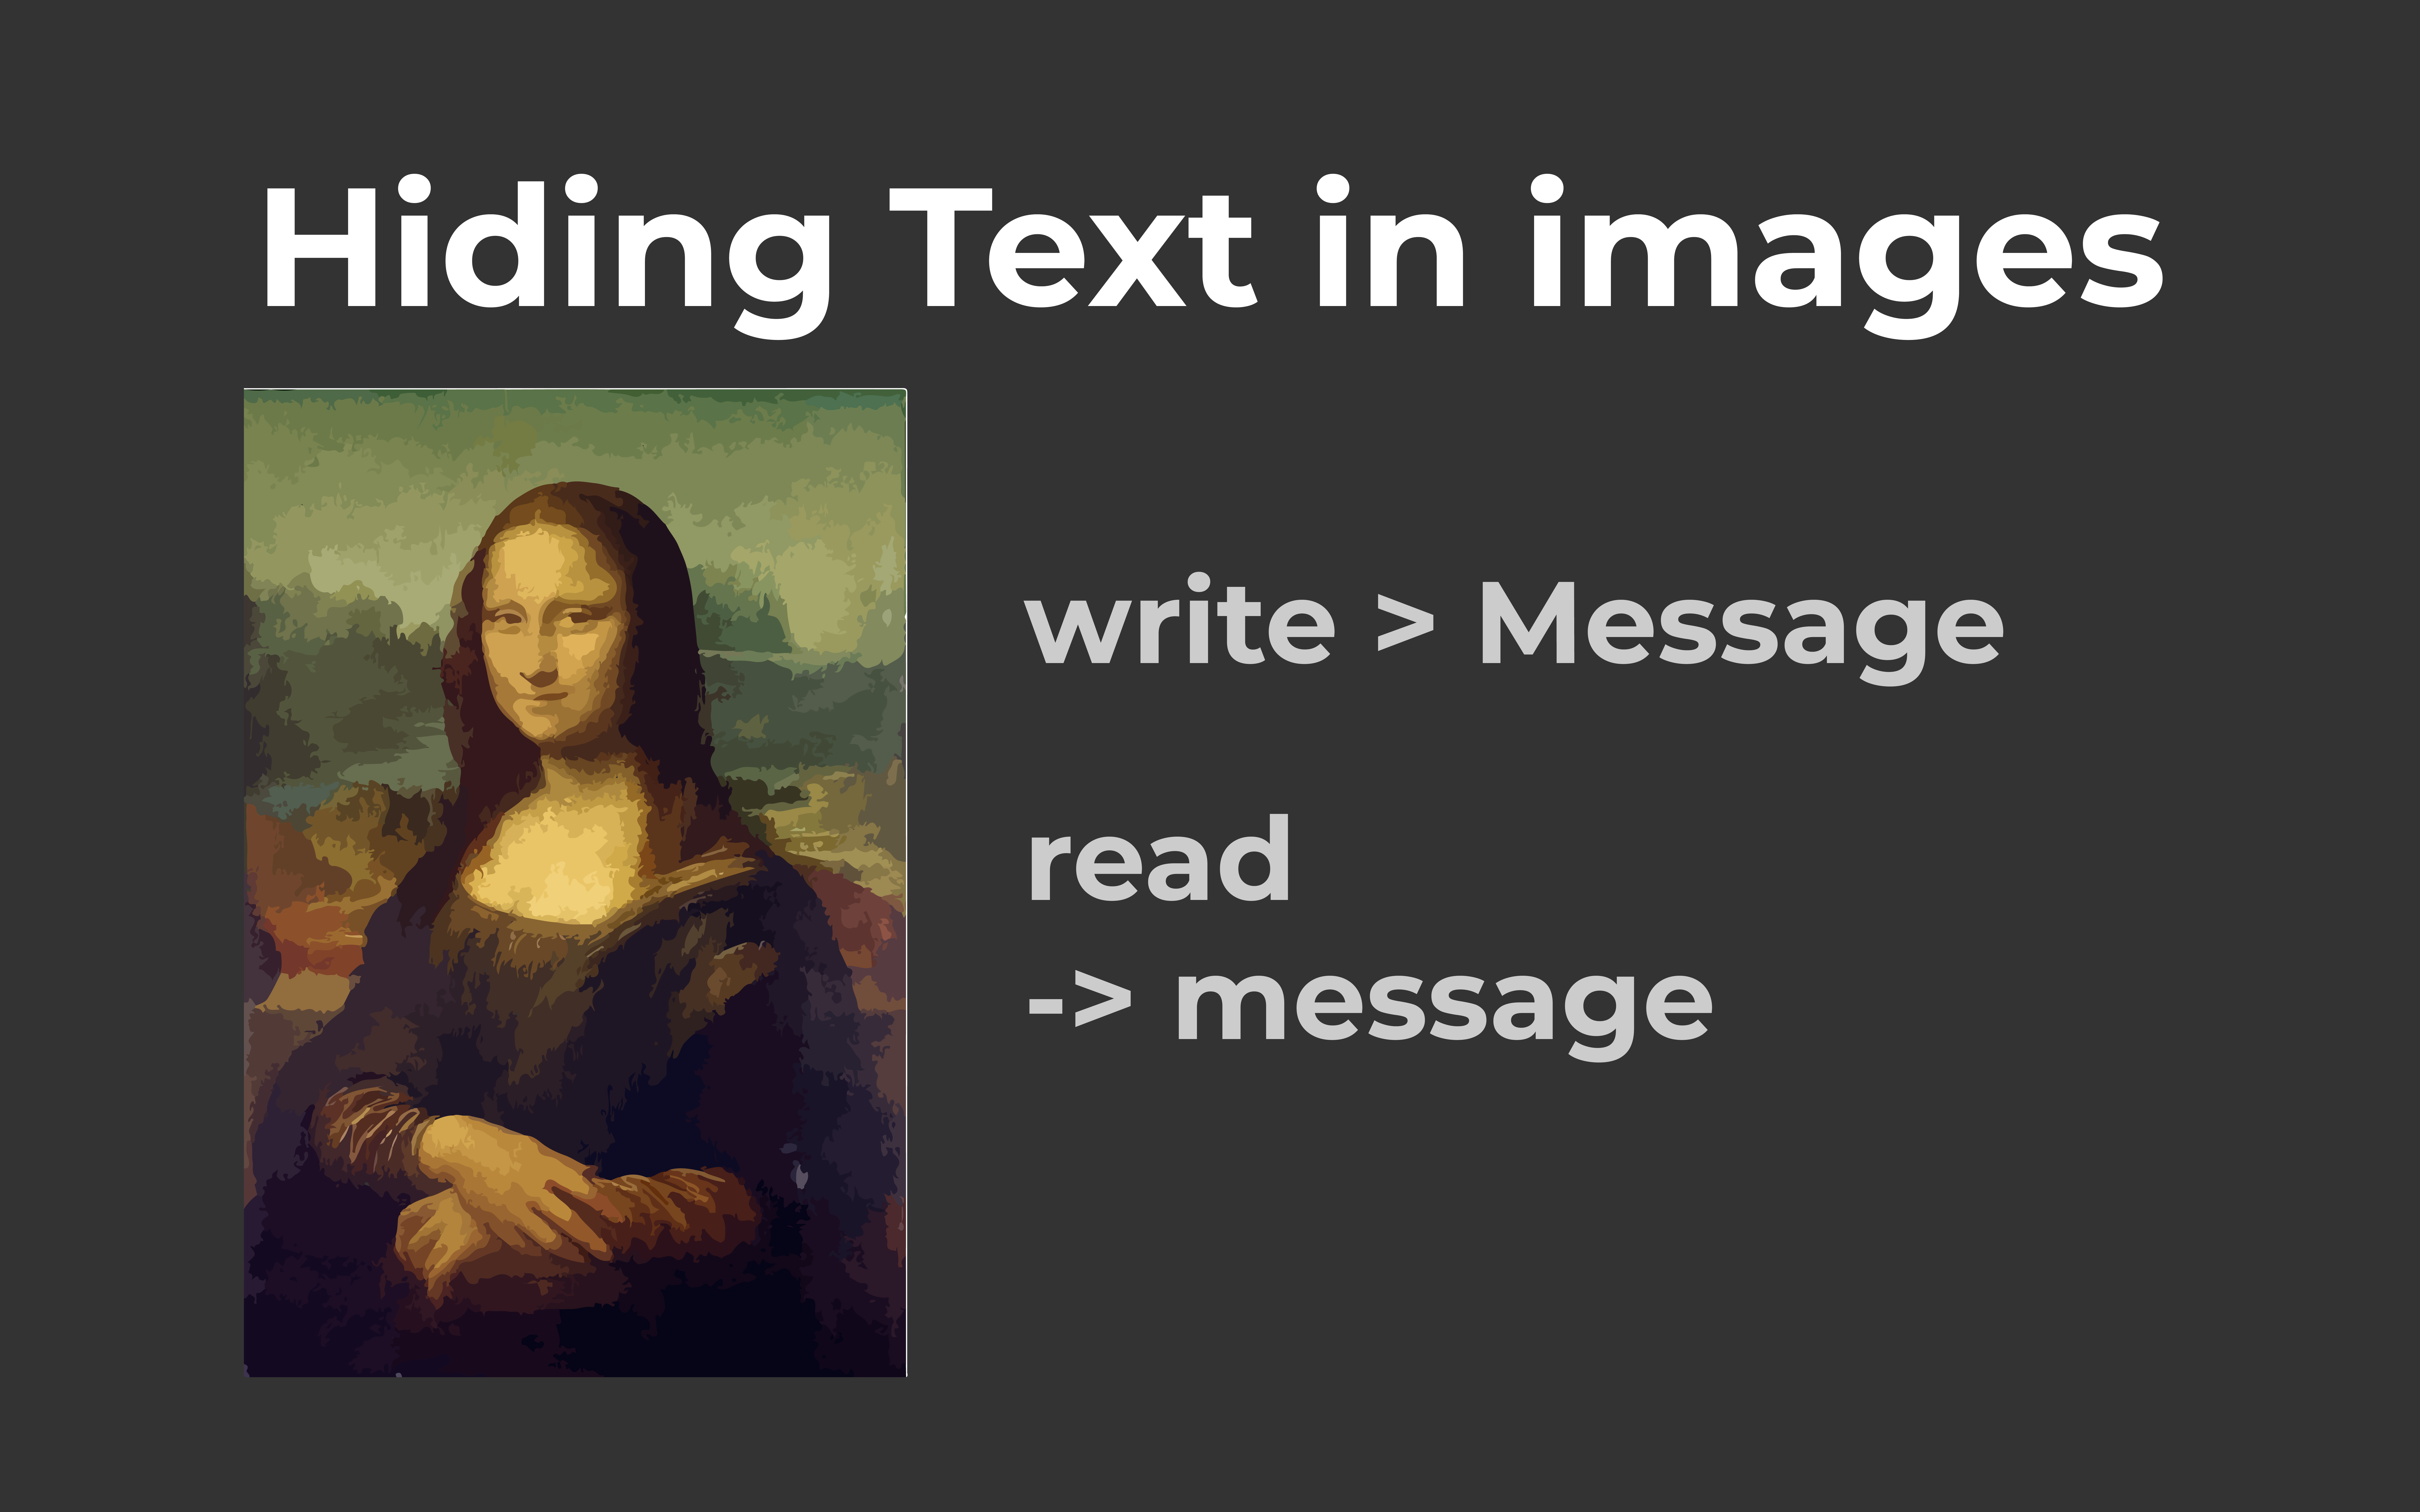 How to hide text in images with python.